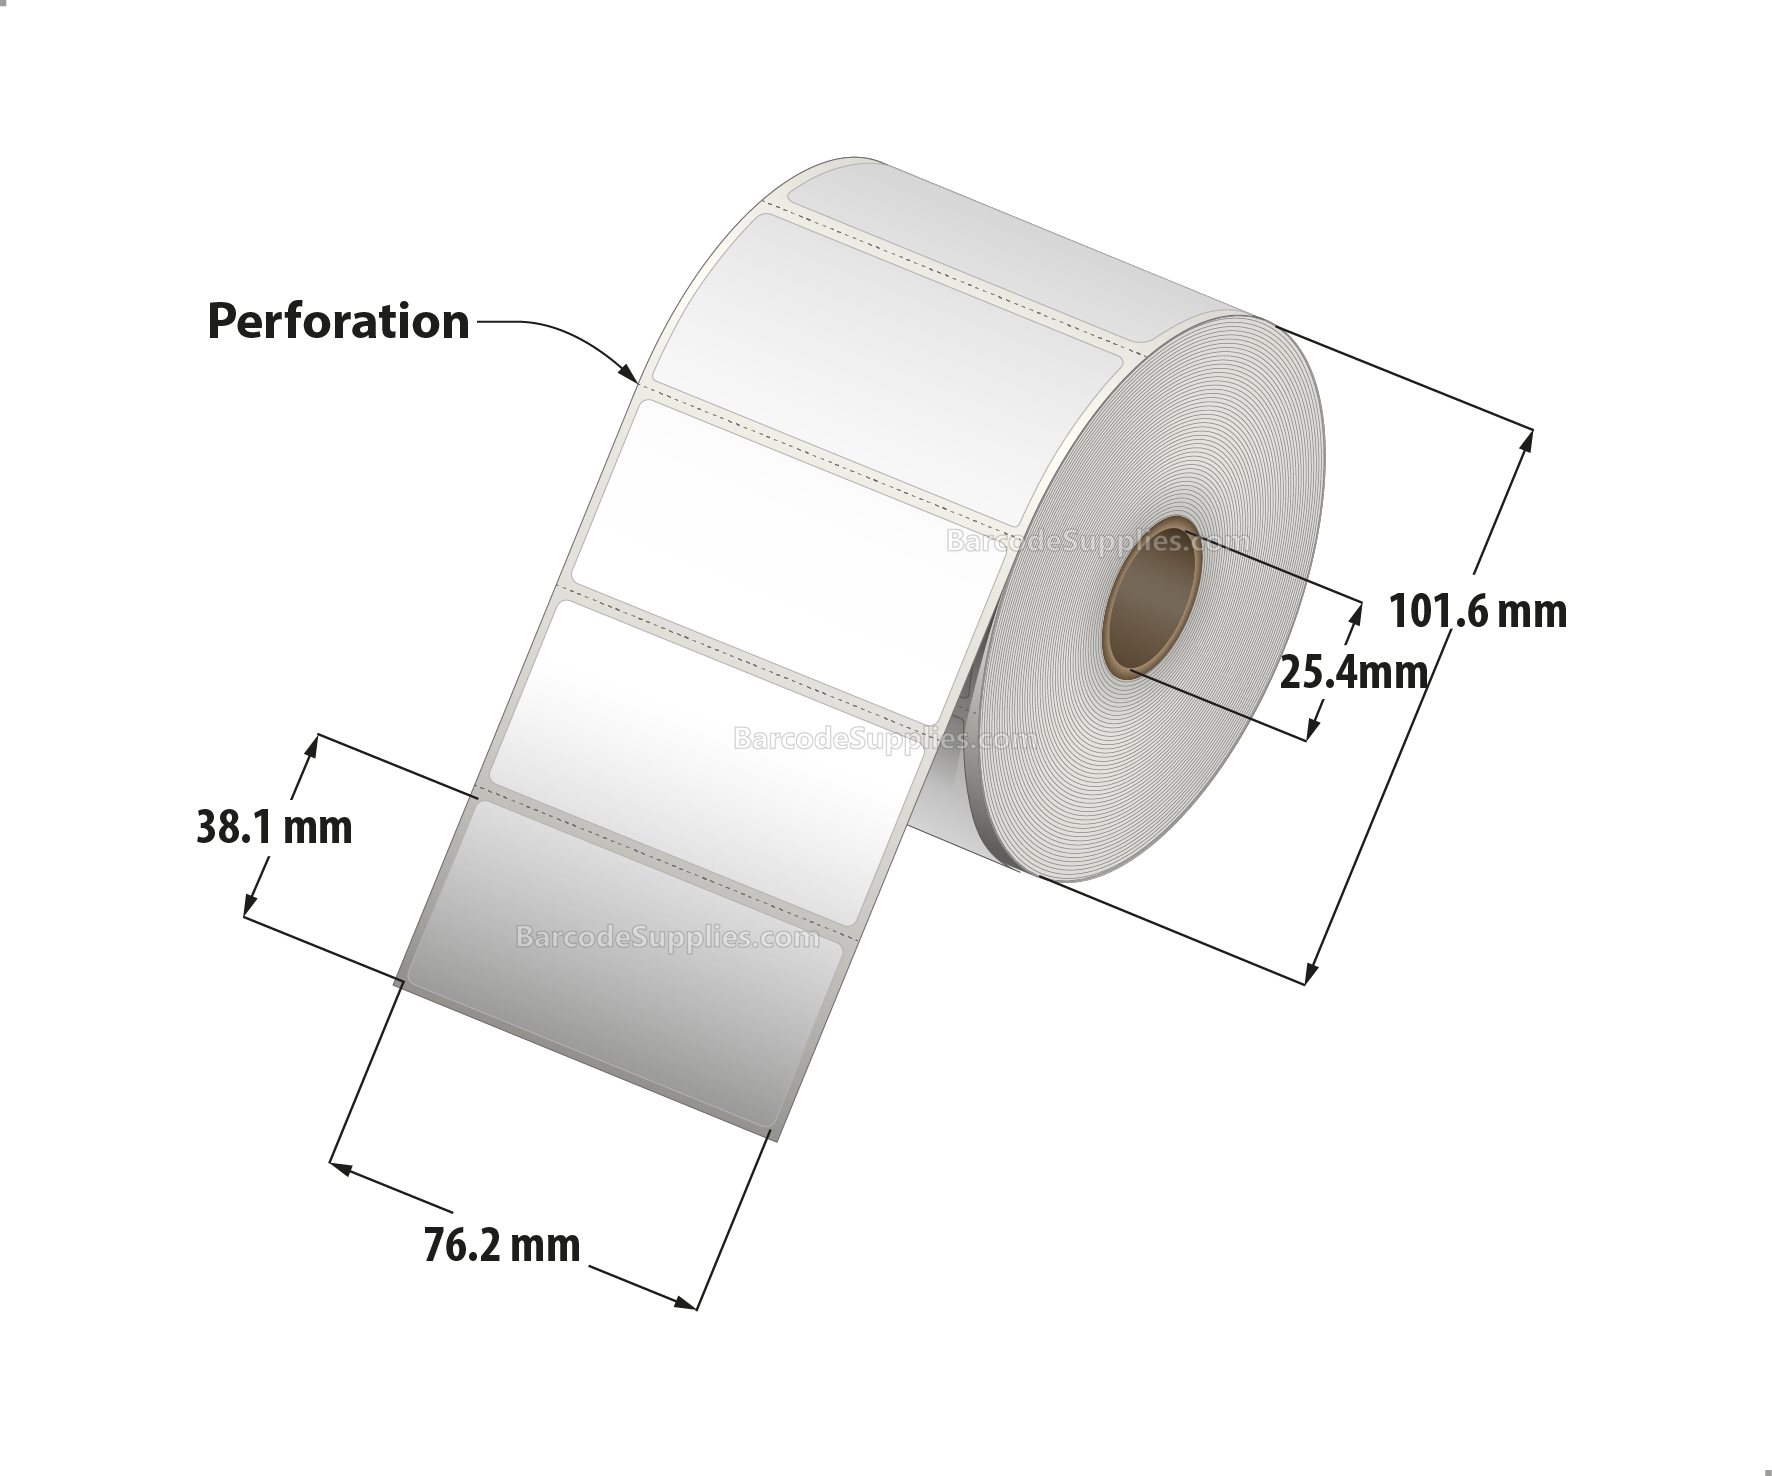 3 x 1.5 Direct Thermal White Labels With Acrylic Adhesive - Perforated - 960 Labels Per Roll - Carton Of 12 Rolls - 11520 Labels Total - MPN: RD-3-15-960-1